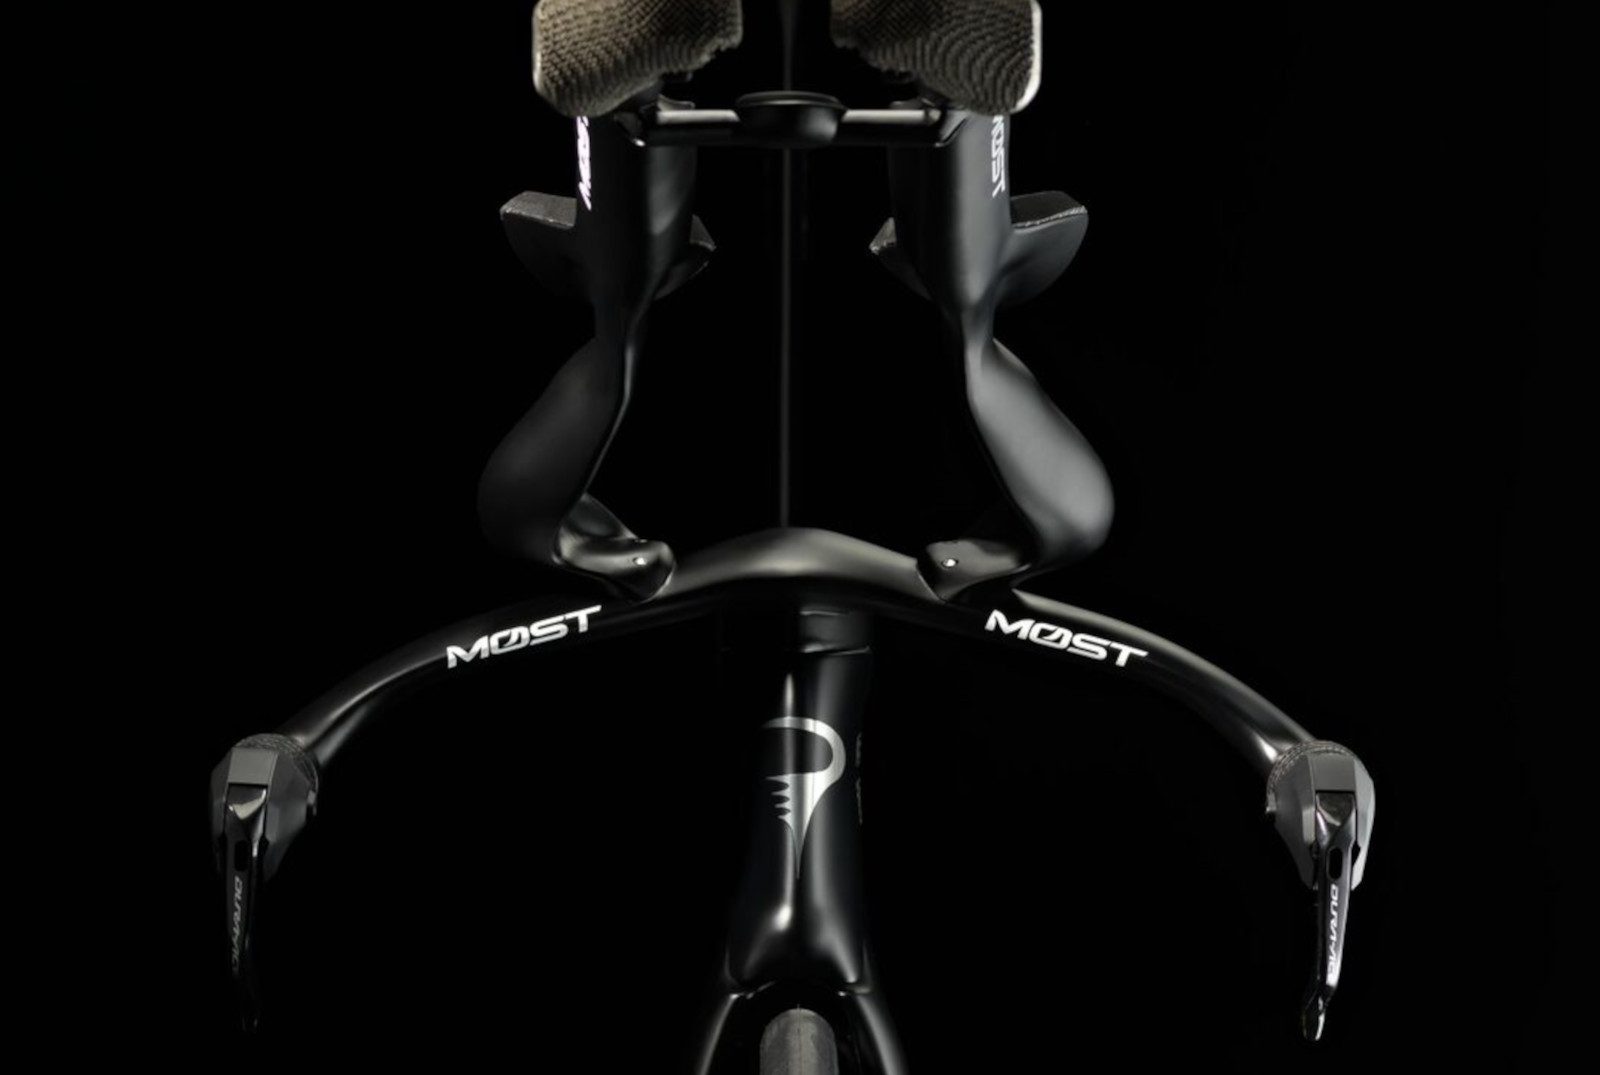 The front end of the new Pinarello Bolide F